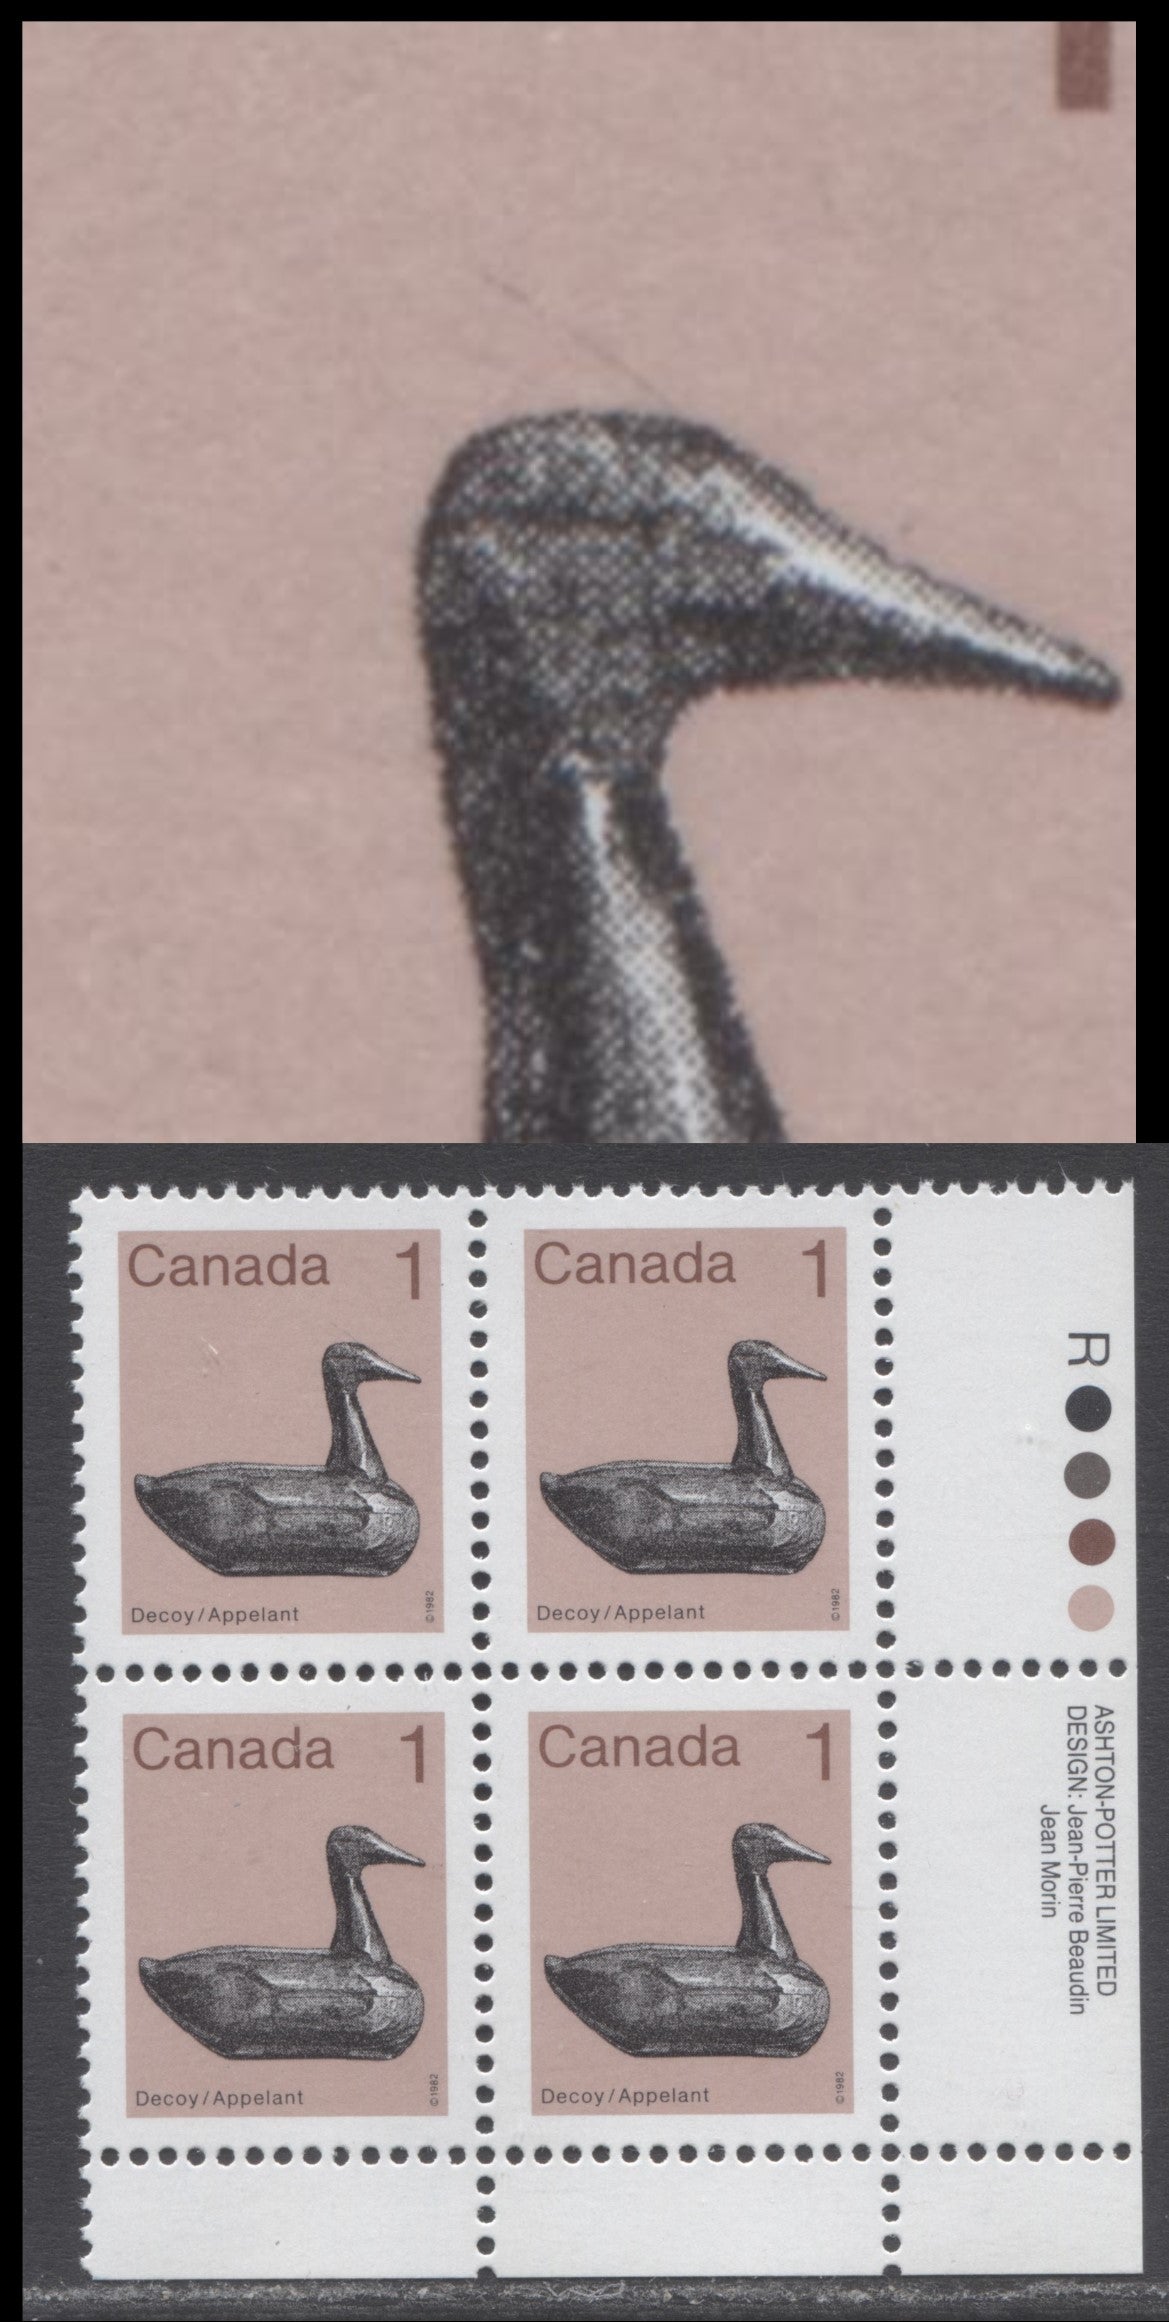 Lot 289 Canada #917vvar 1c Light Brown & Multicolored Decoy, 1982-1897 Low-Value Artifact Definitives, A VFNH LR Inscription Block Of 4 With Hair On Ducks Head (Pos. 89) On Scarce & Unlisted F/HF-fl Paper